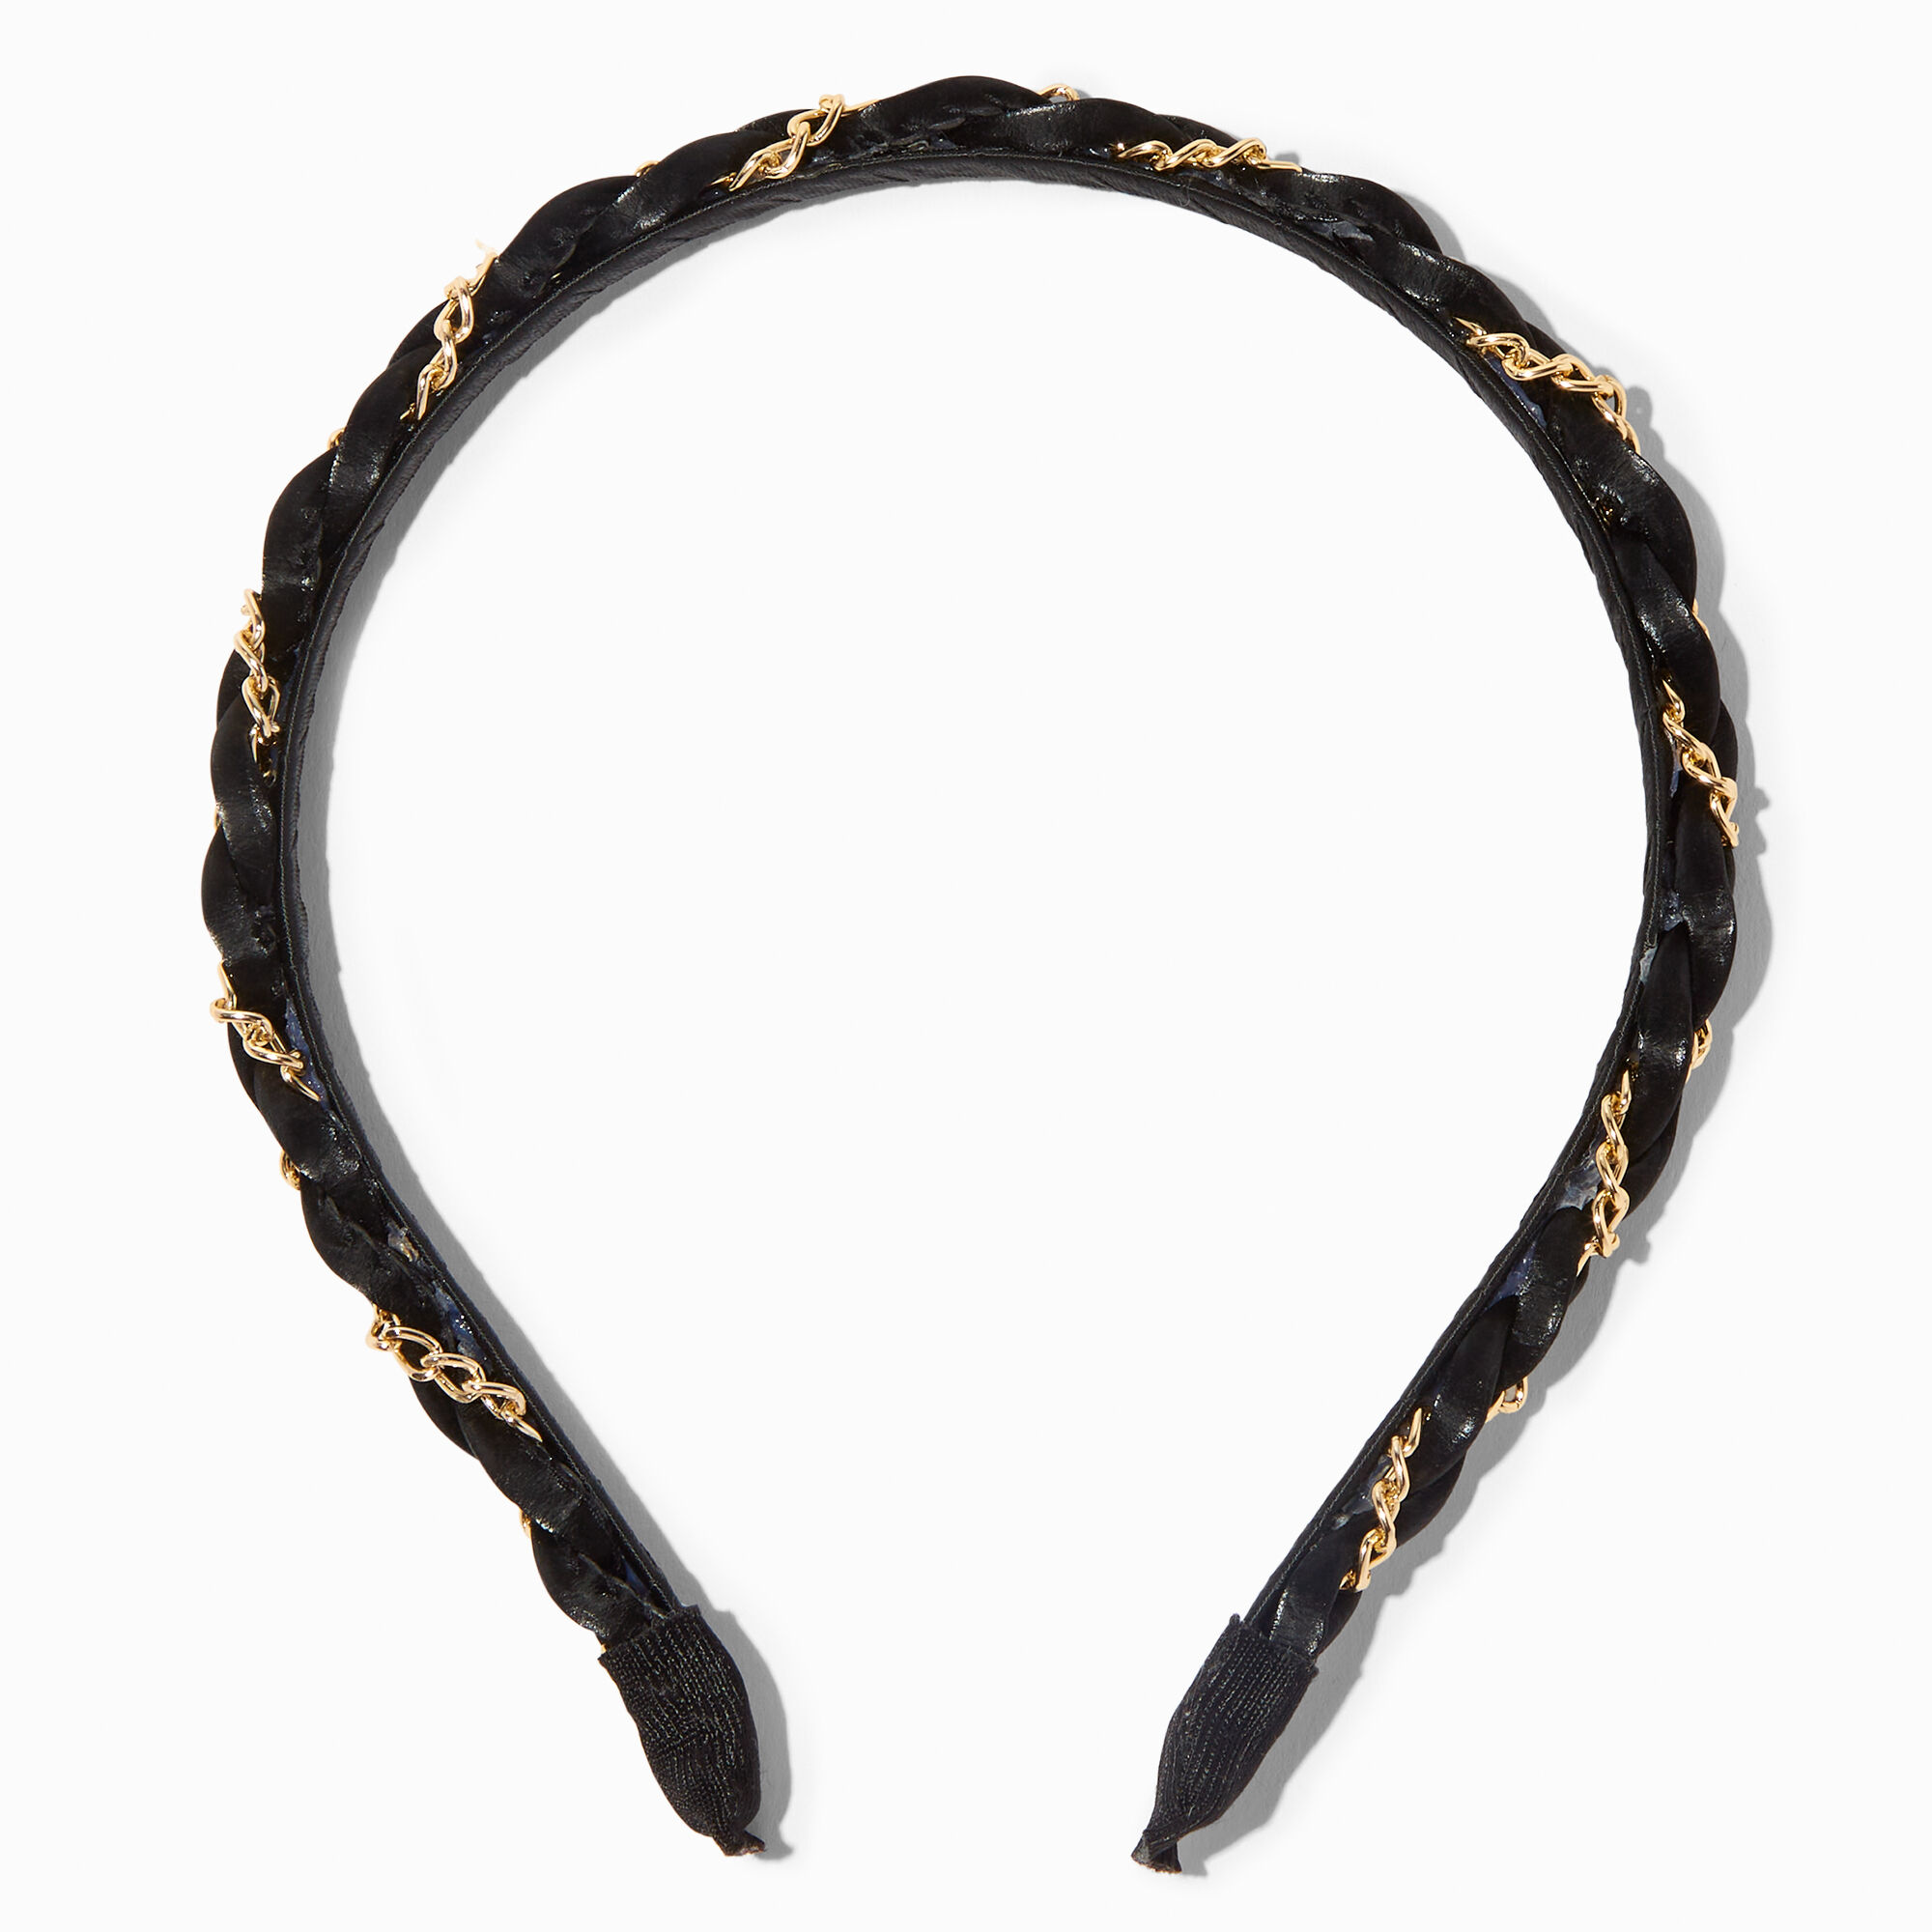 View Claires Gold Chain Woven Headband Black information